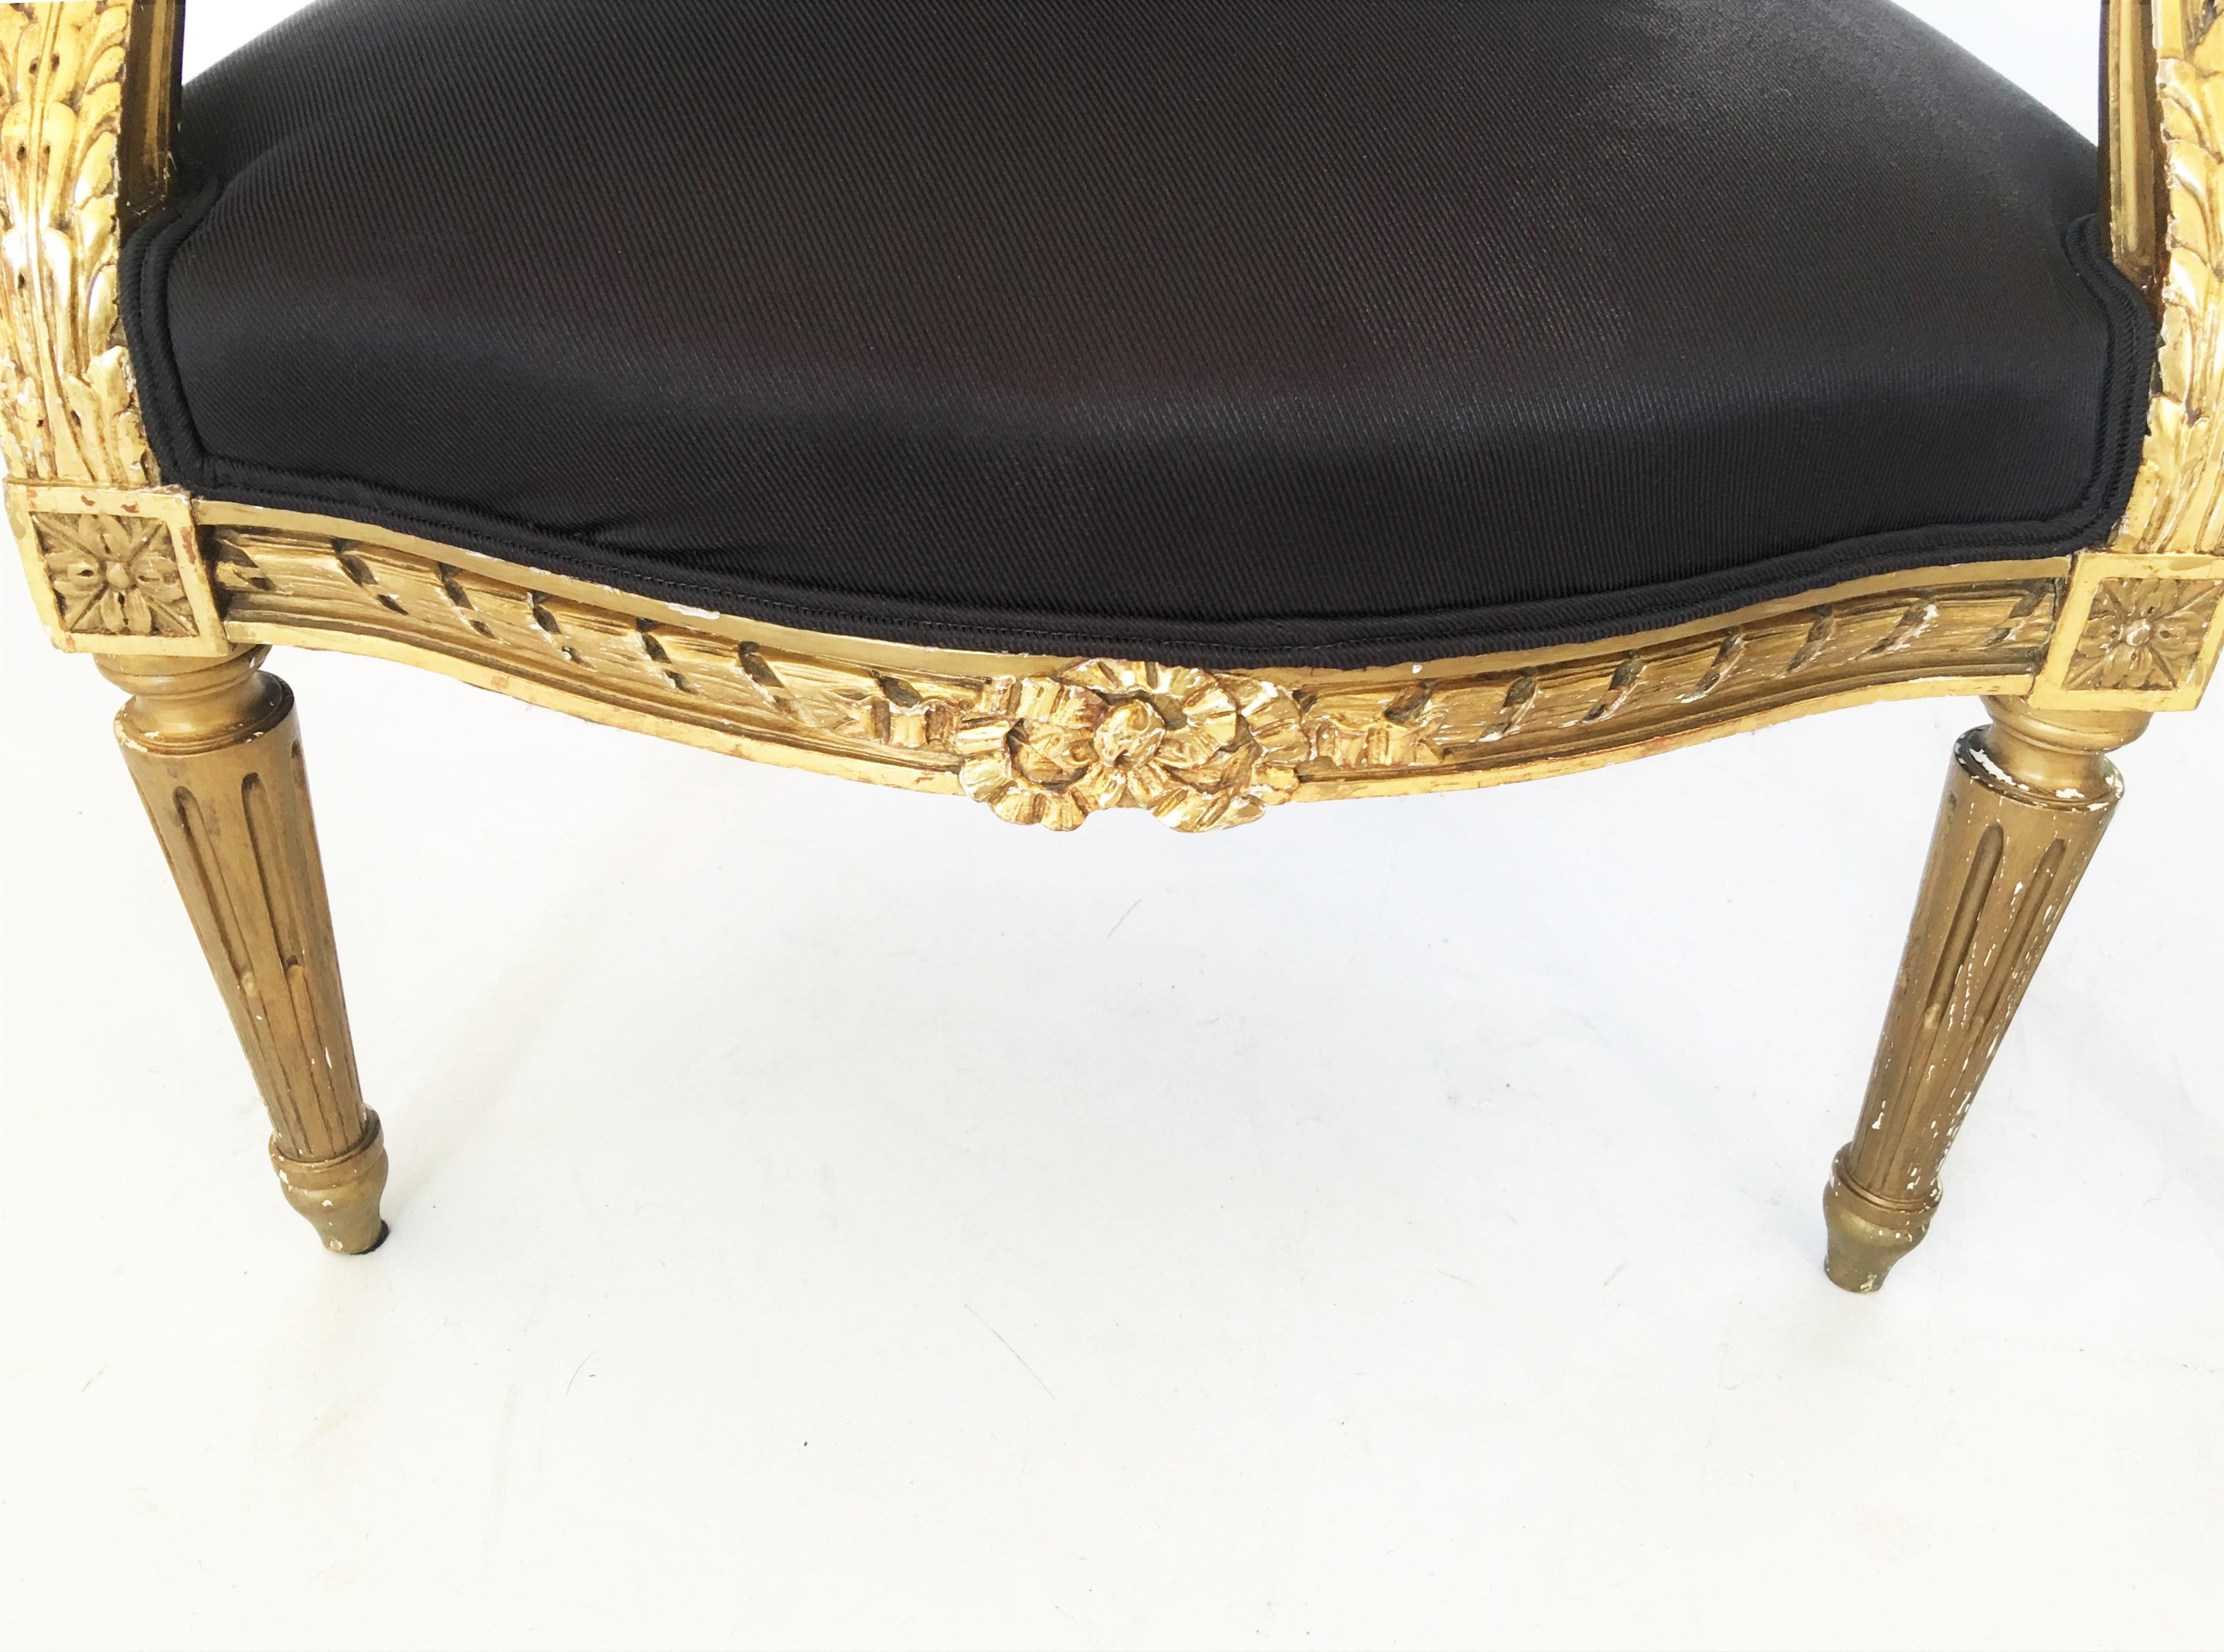 19th Century French Louis XVI Style Giltwood Fauteuils, Pair For Sale 7